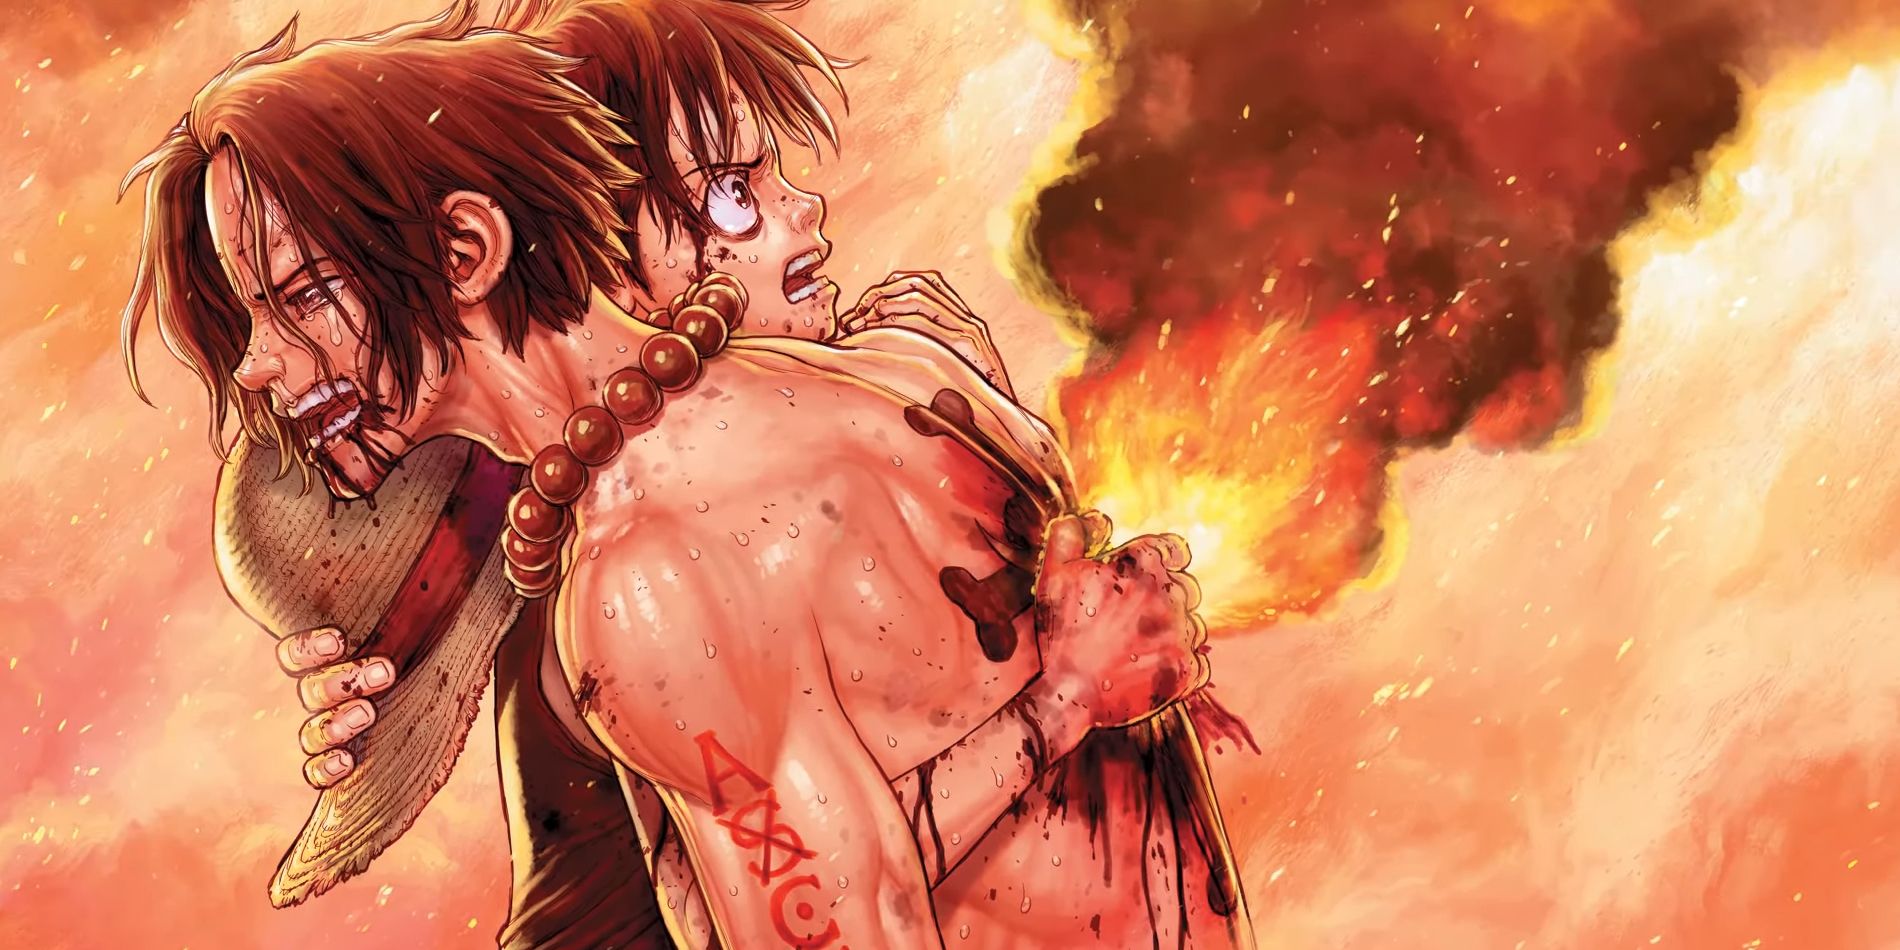 Colored manga panel from One Piece Ace Story Manga from artist Boichi shows a shocked Luffy clutching a crying Ace as fire erupts from a spot on his back.